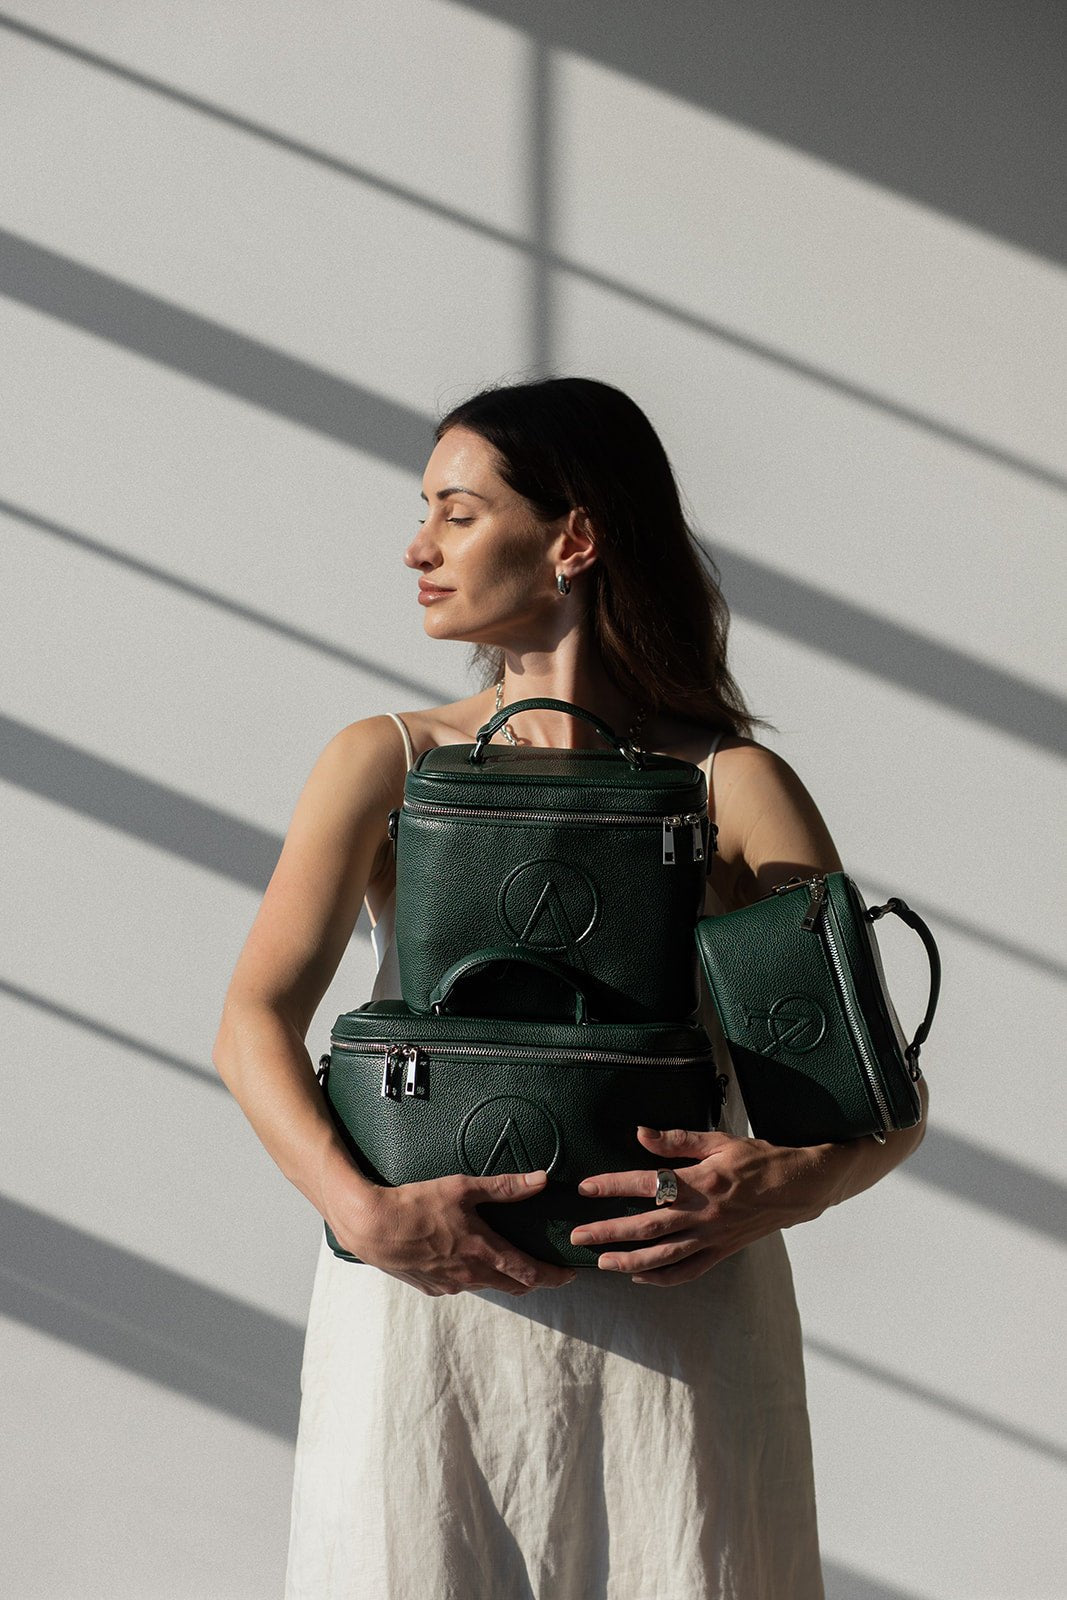 The Story behind the Eva: From Fire Evacuation to Glamorous Vanity Bag - Atmosphera